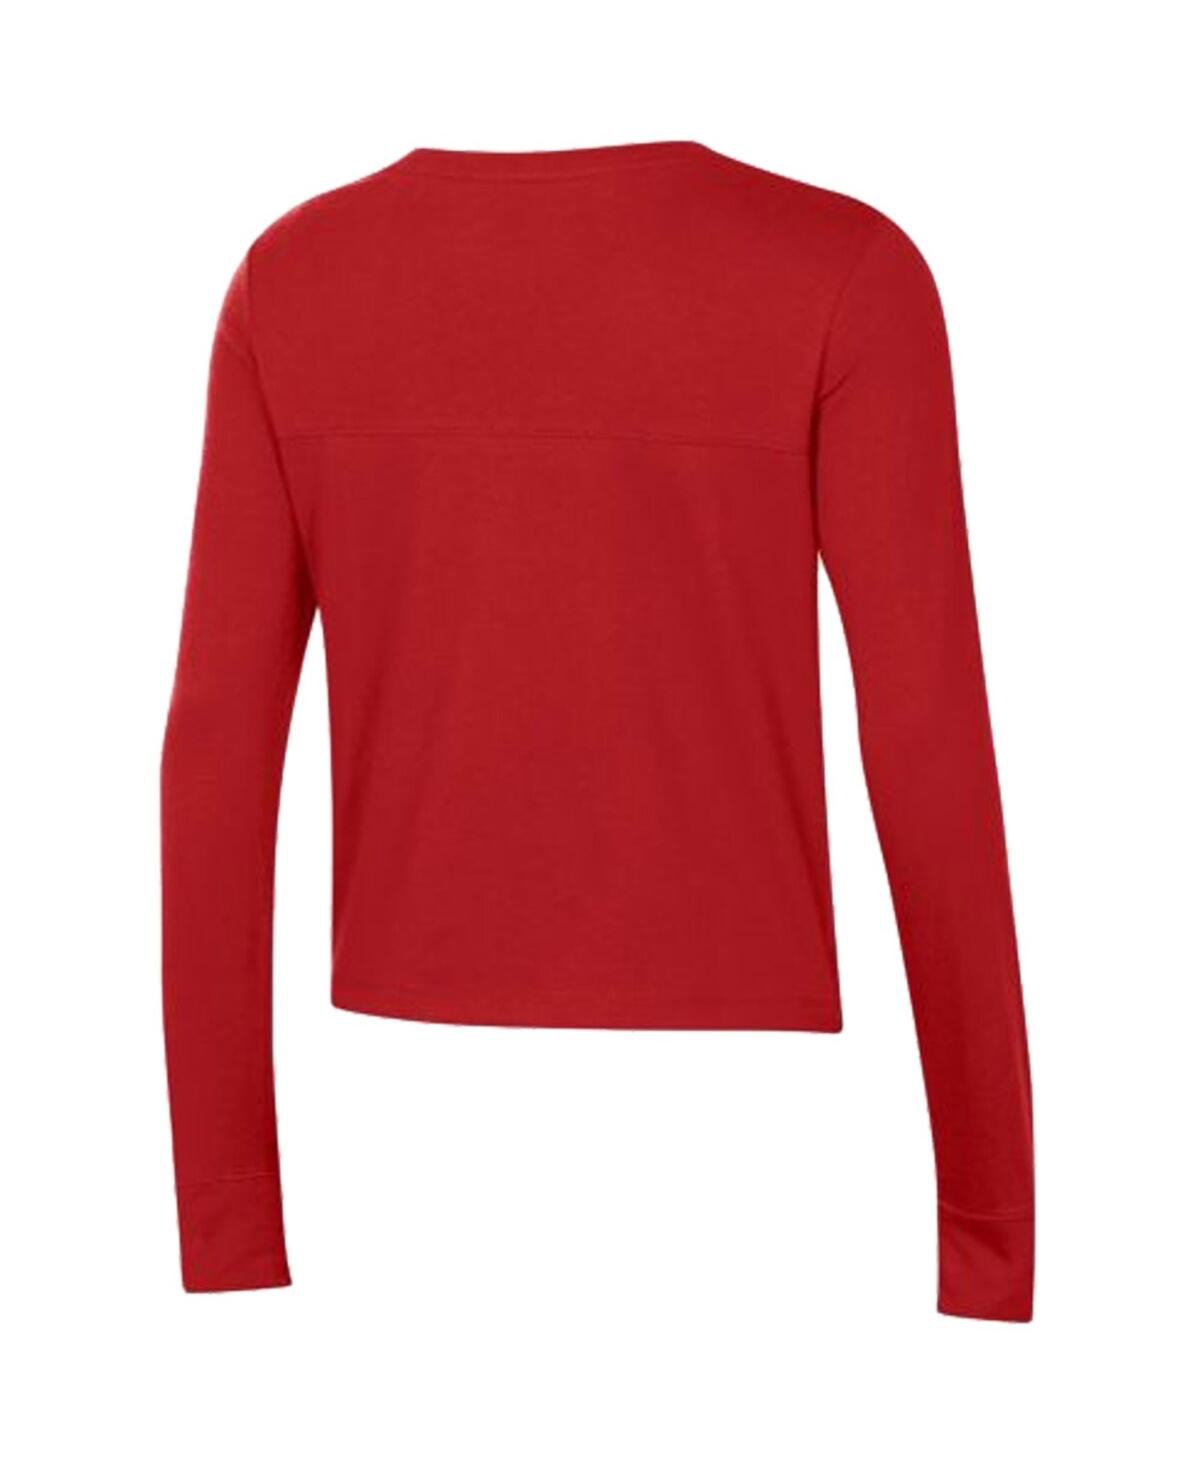 Shop Under Armour Women's  Red Wisconsin Badgers Vault Cropped Long Sleeve T-shirt